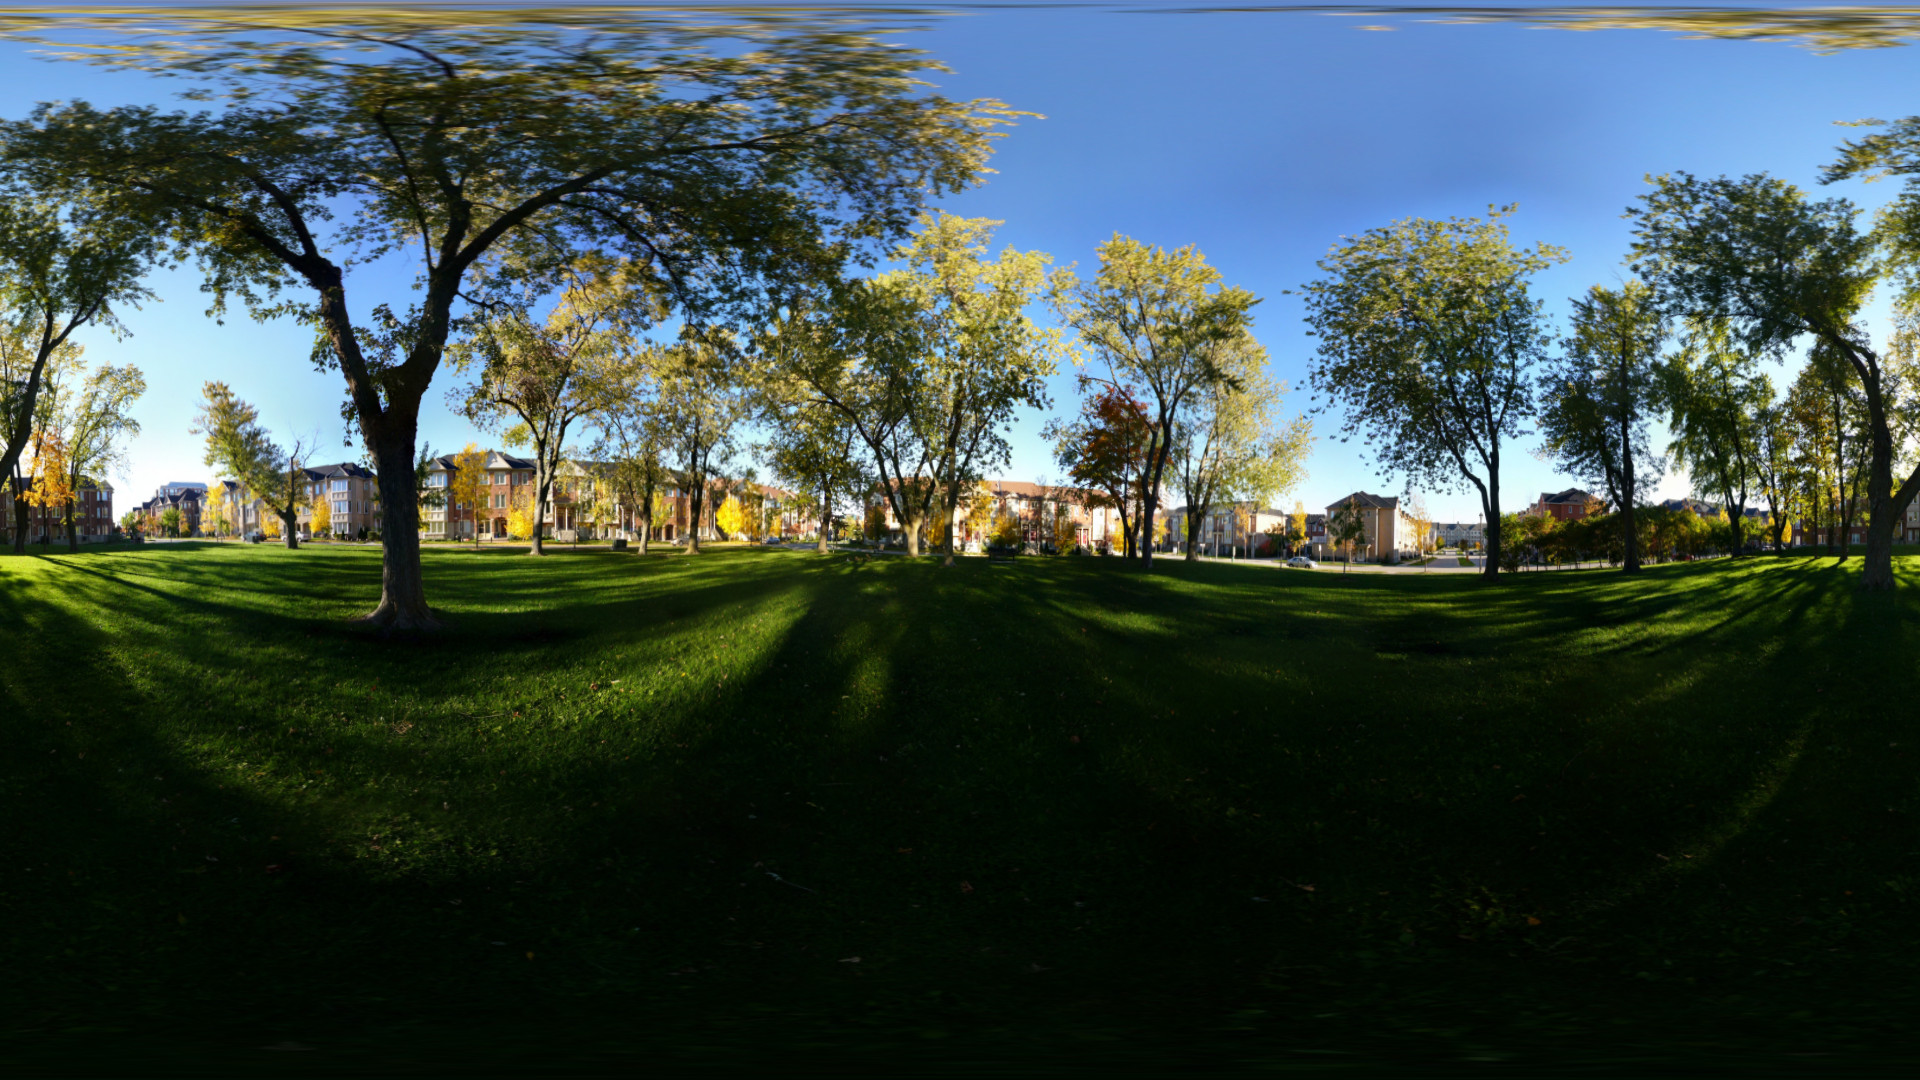 A 360 degree image of an urban park, projected onto a rectangular image.